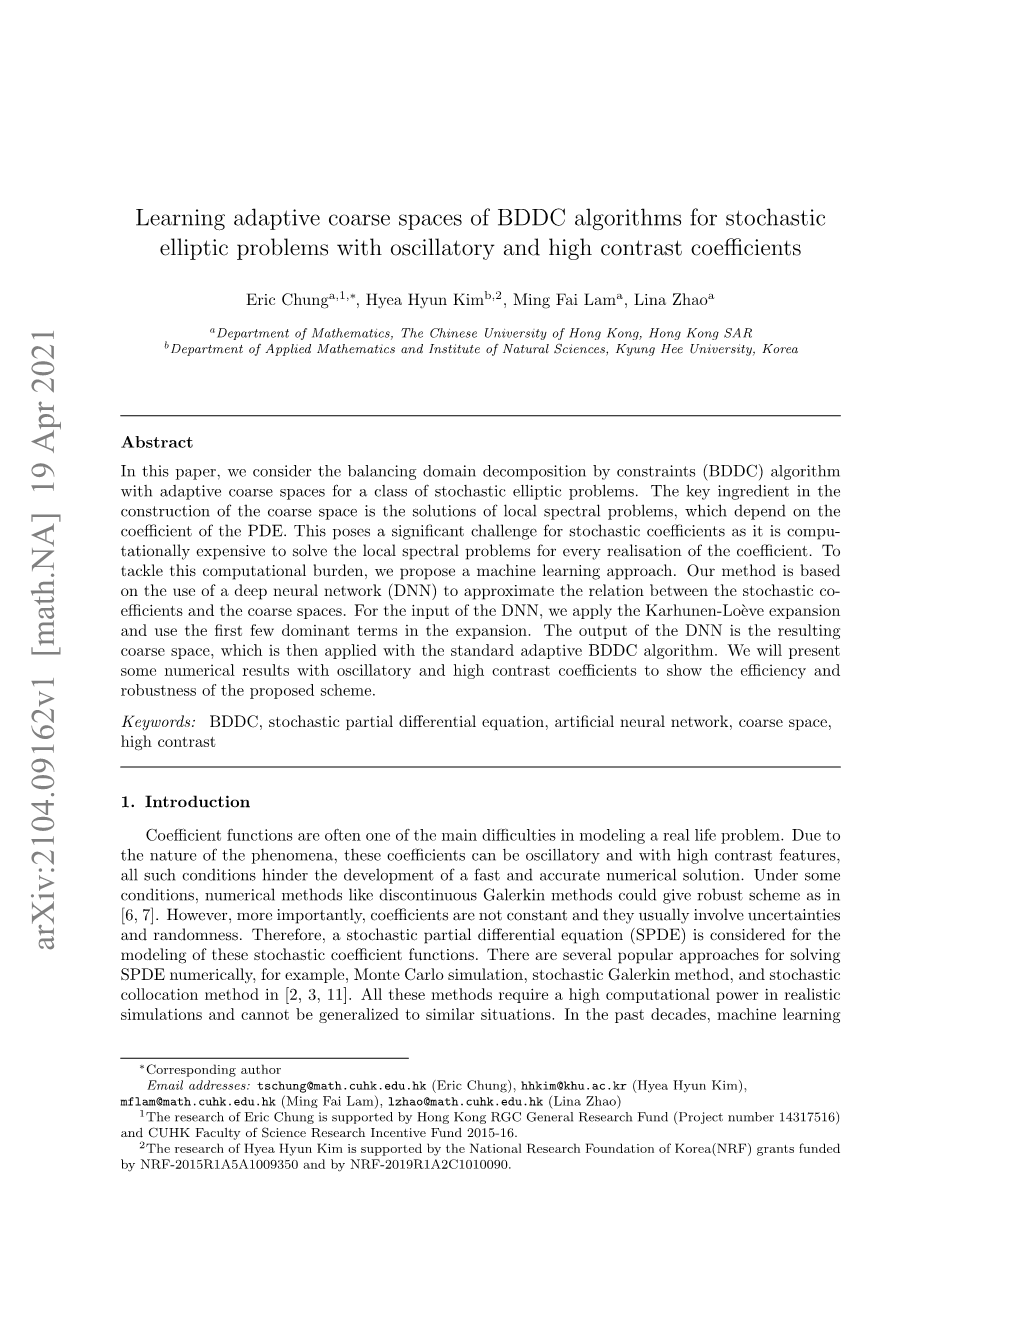 Learning Adaptive Coarse Spaces of BDDC Algorithms for Stochastic Elliptic Problems with Oscillatory and High Contrast Coeﬃcients